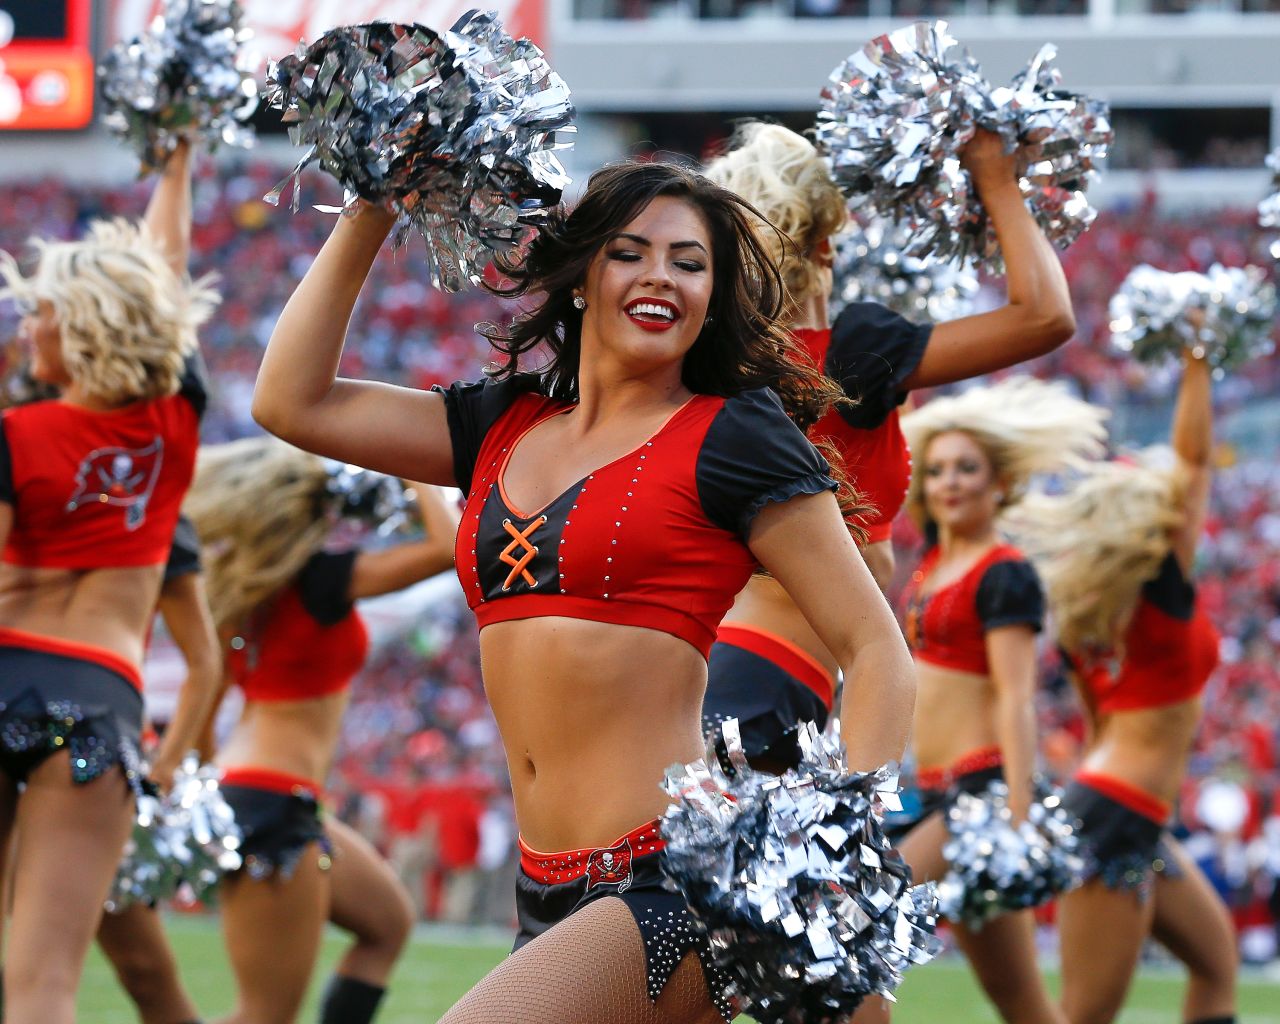 The Tampa Bay Buccanneers cheerleaders in 2016, wearing pirate-themed two pieces.